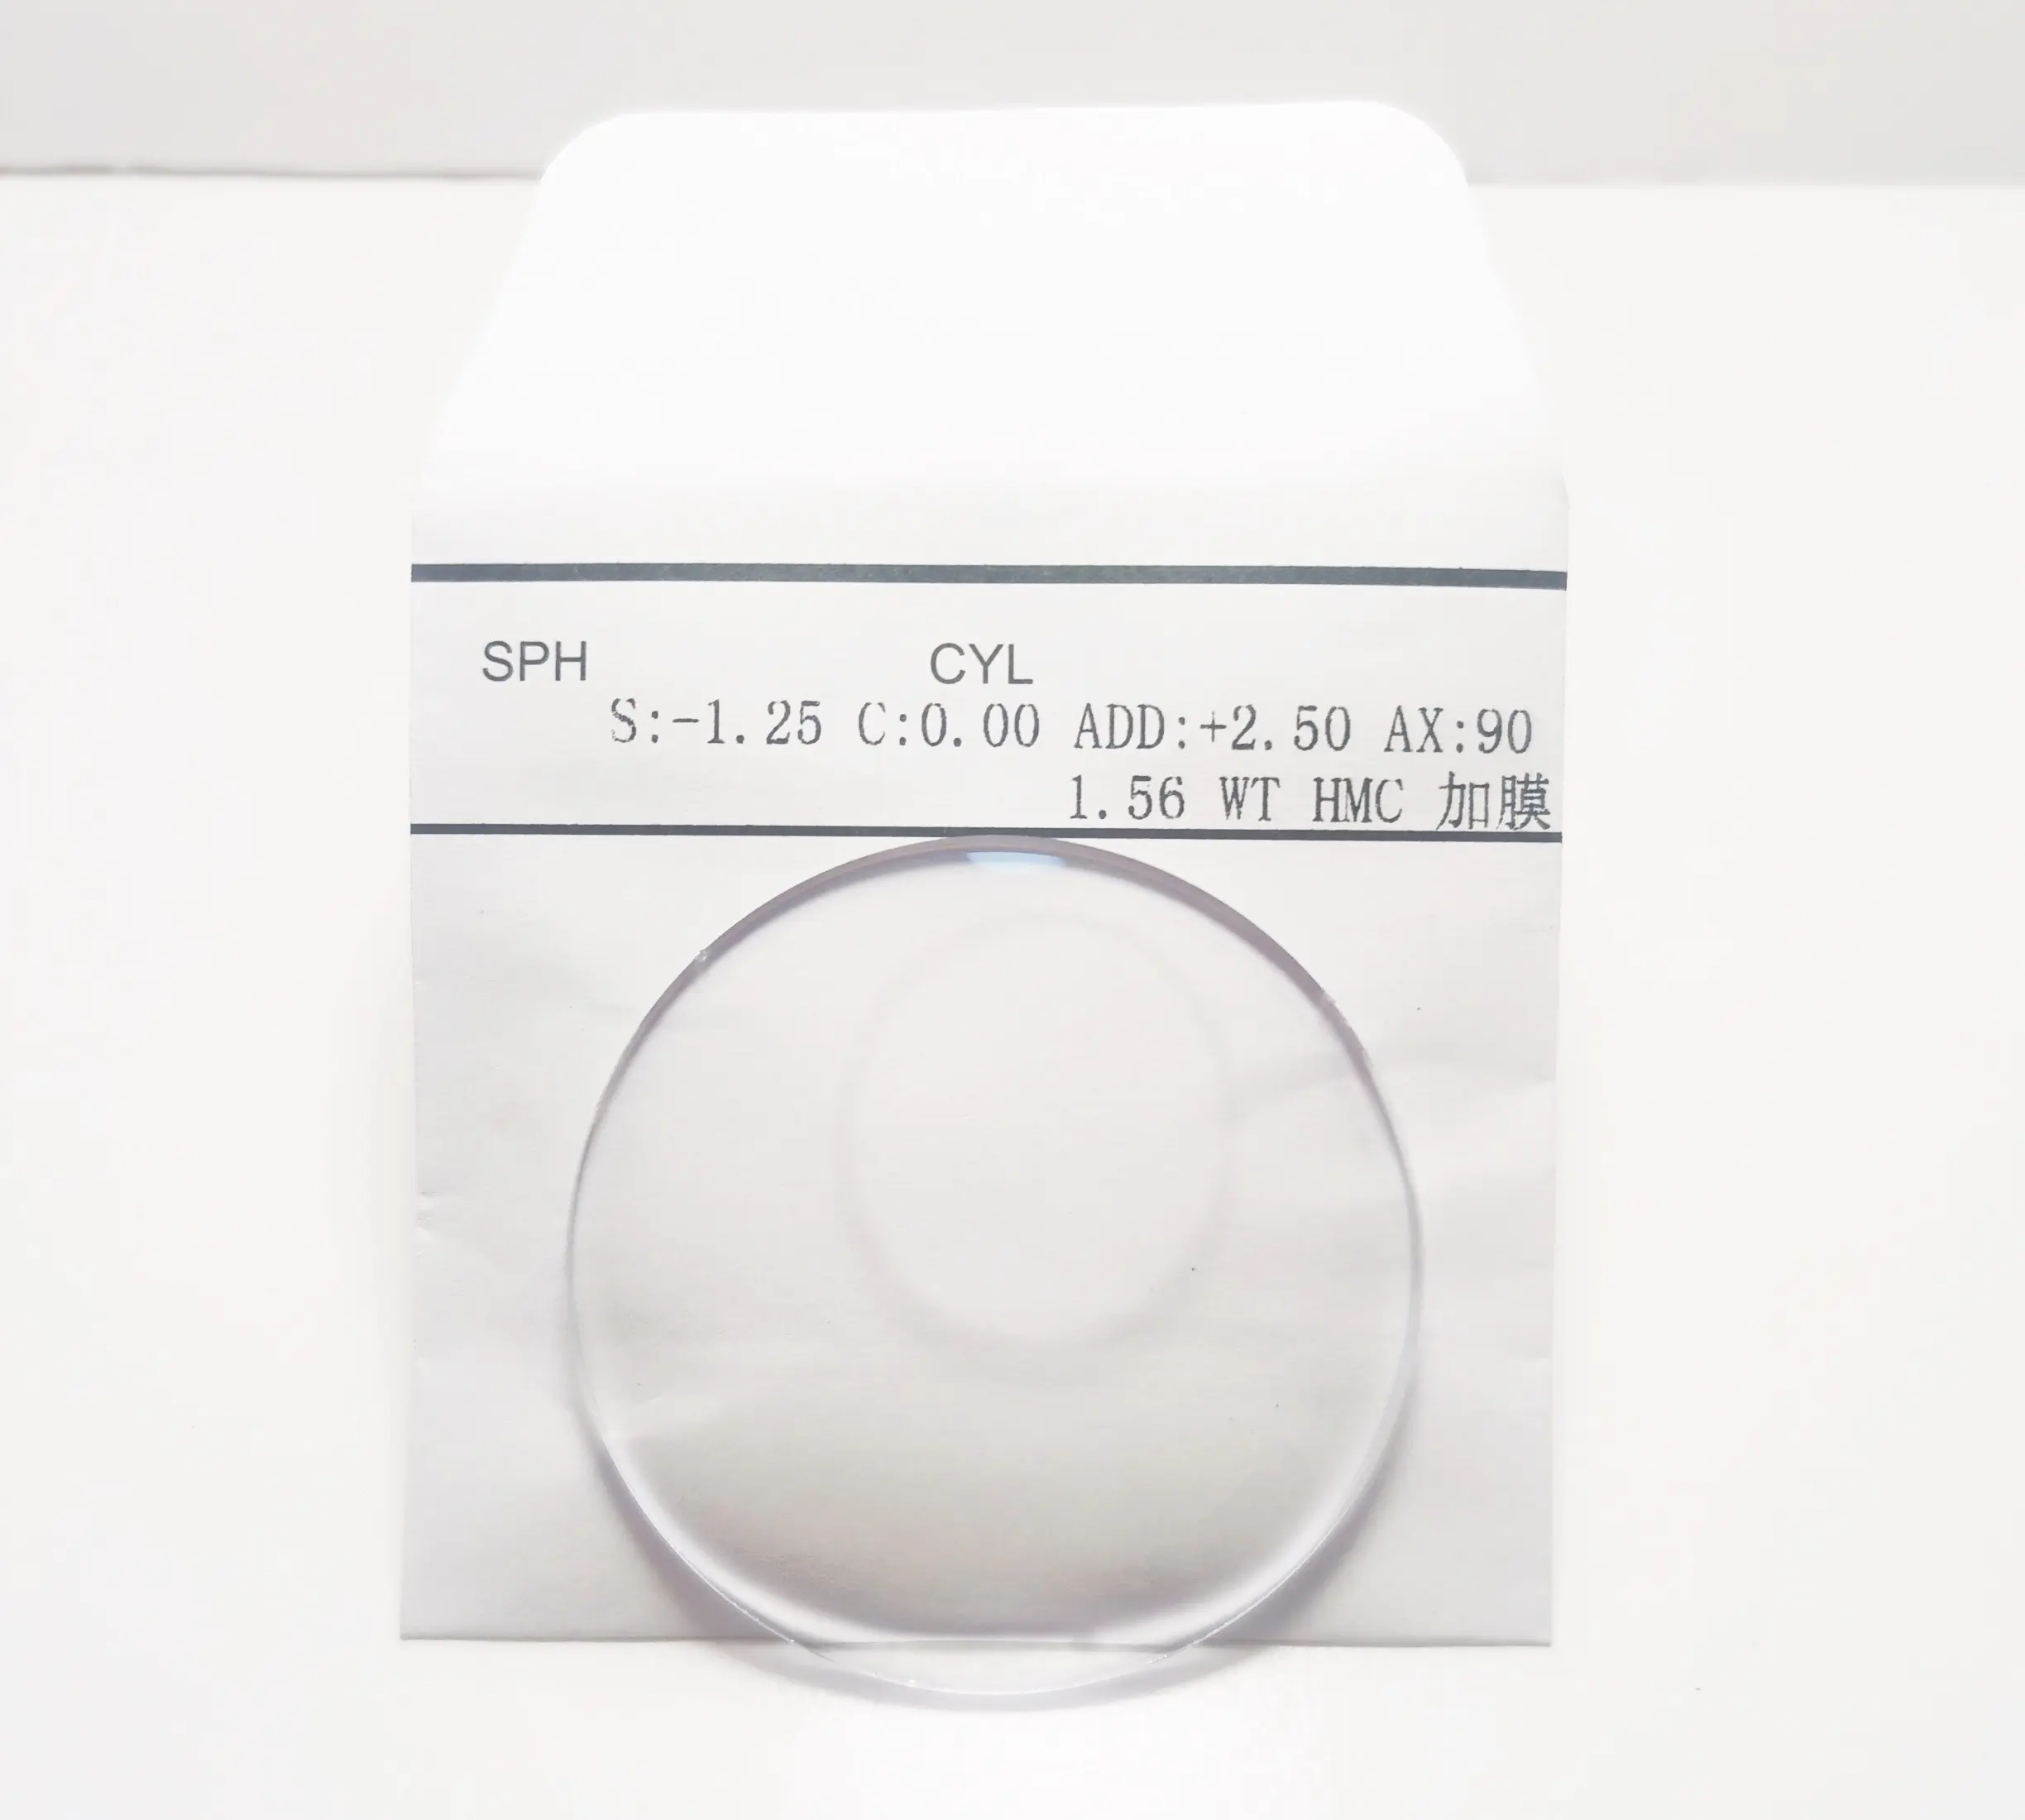 1.56 Compound Round Top RX HC Optical Resin Eye Lens